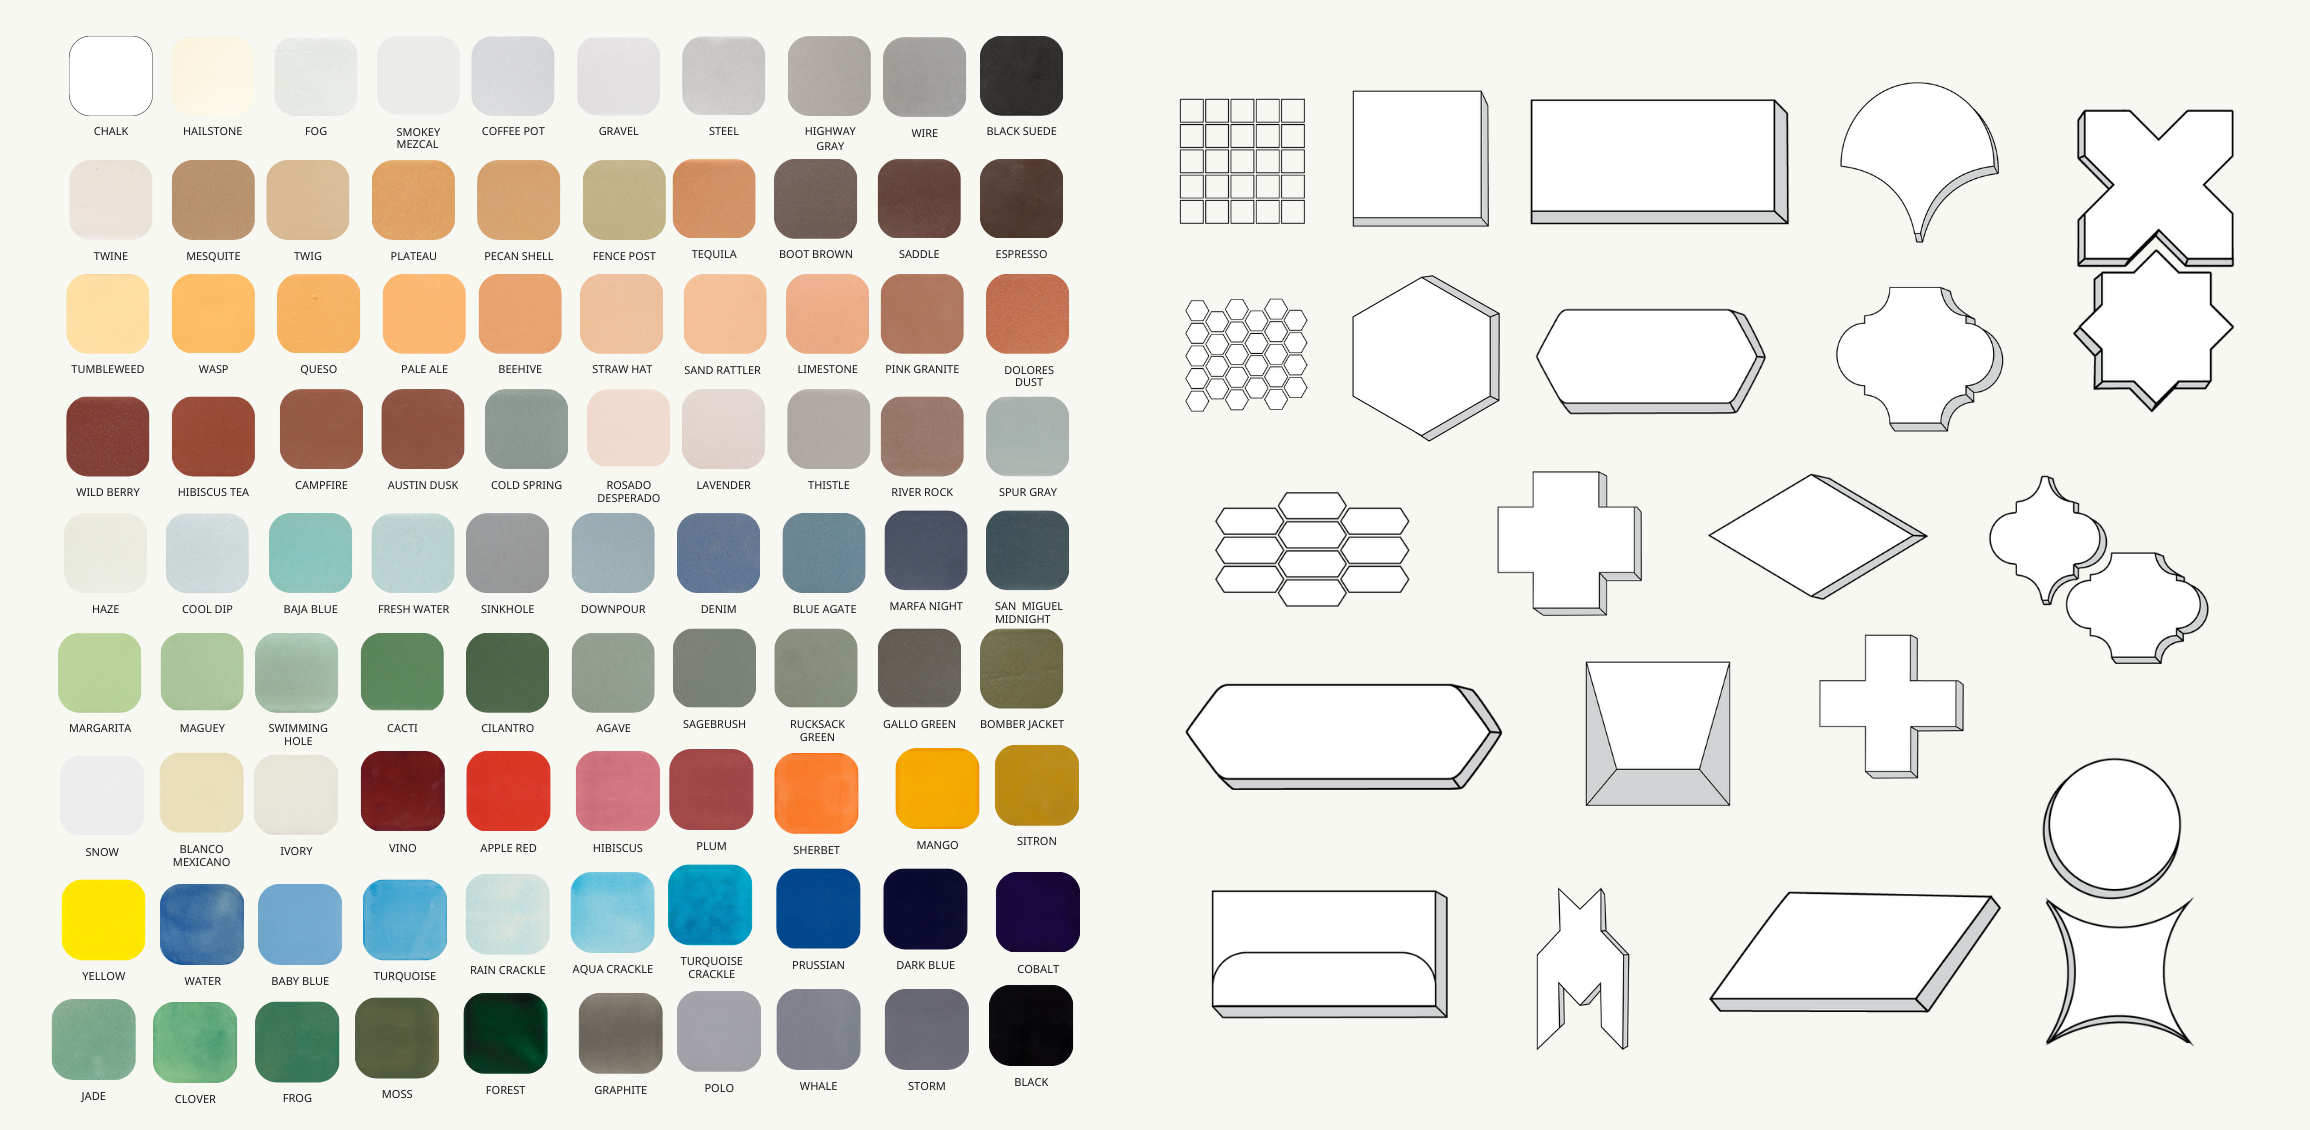 Graphic of color options and tile shapes available for customization clay imports